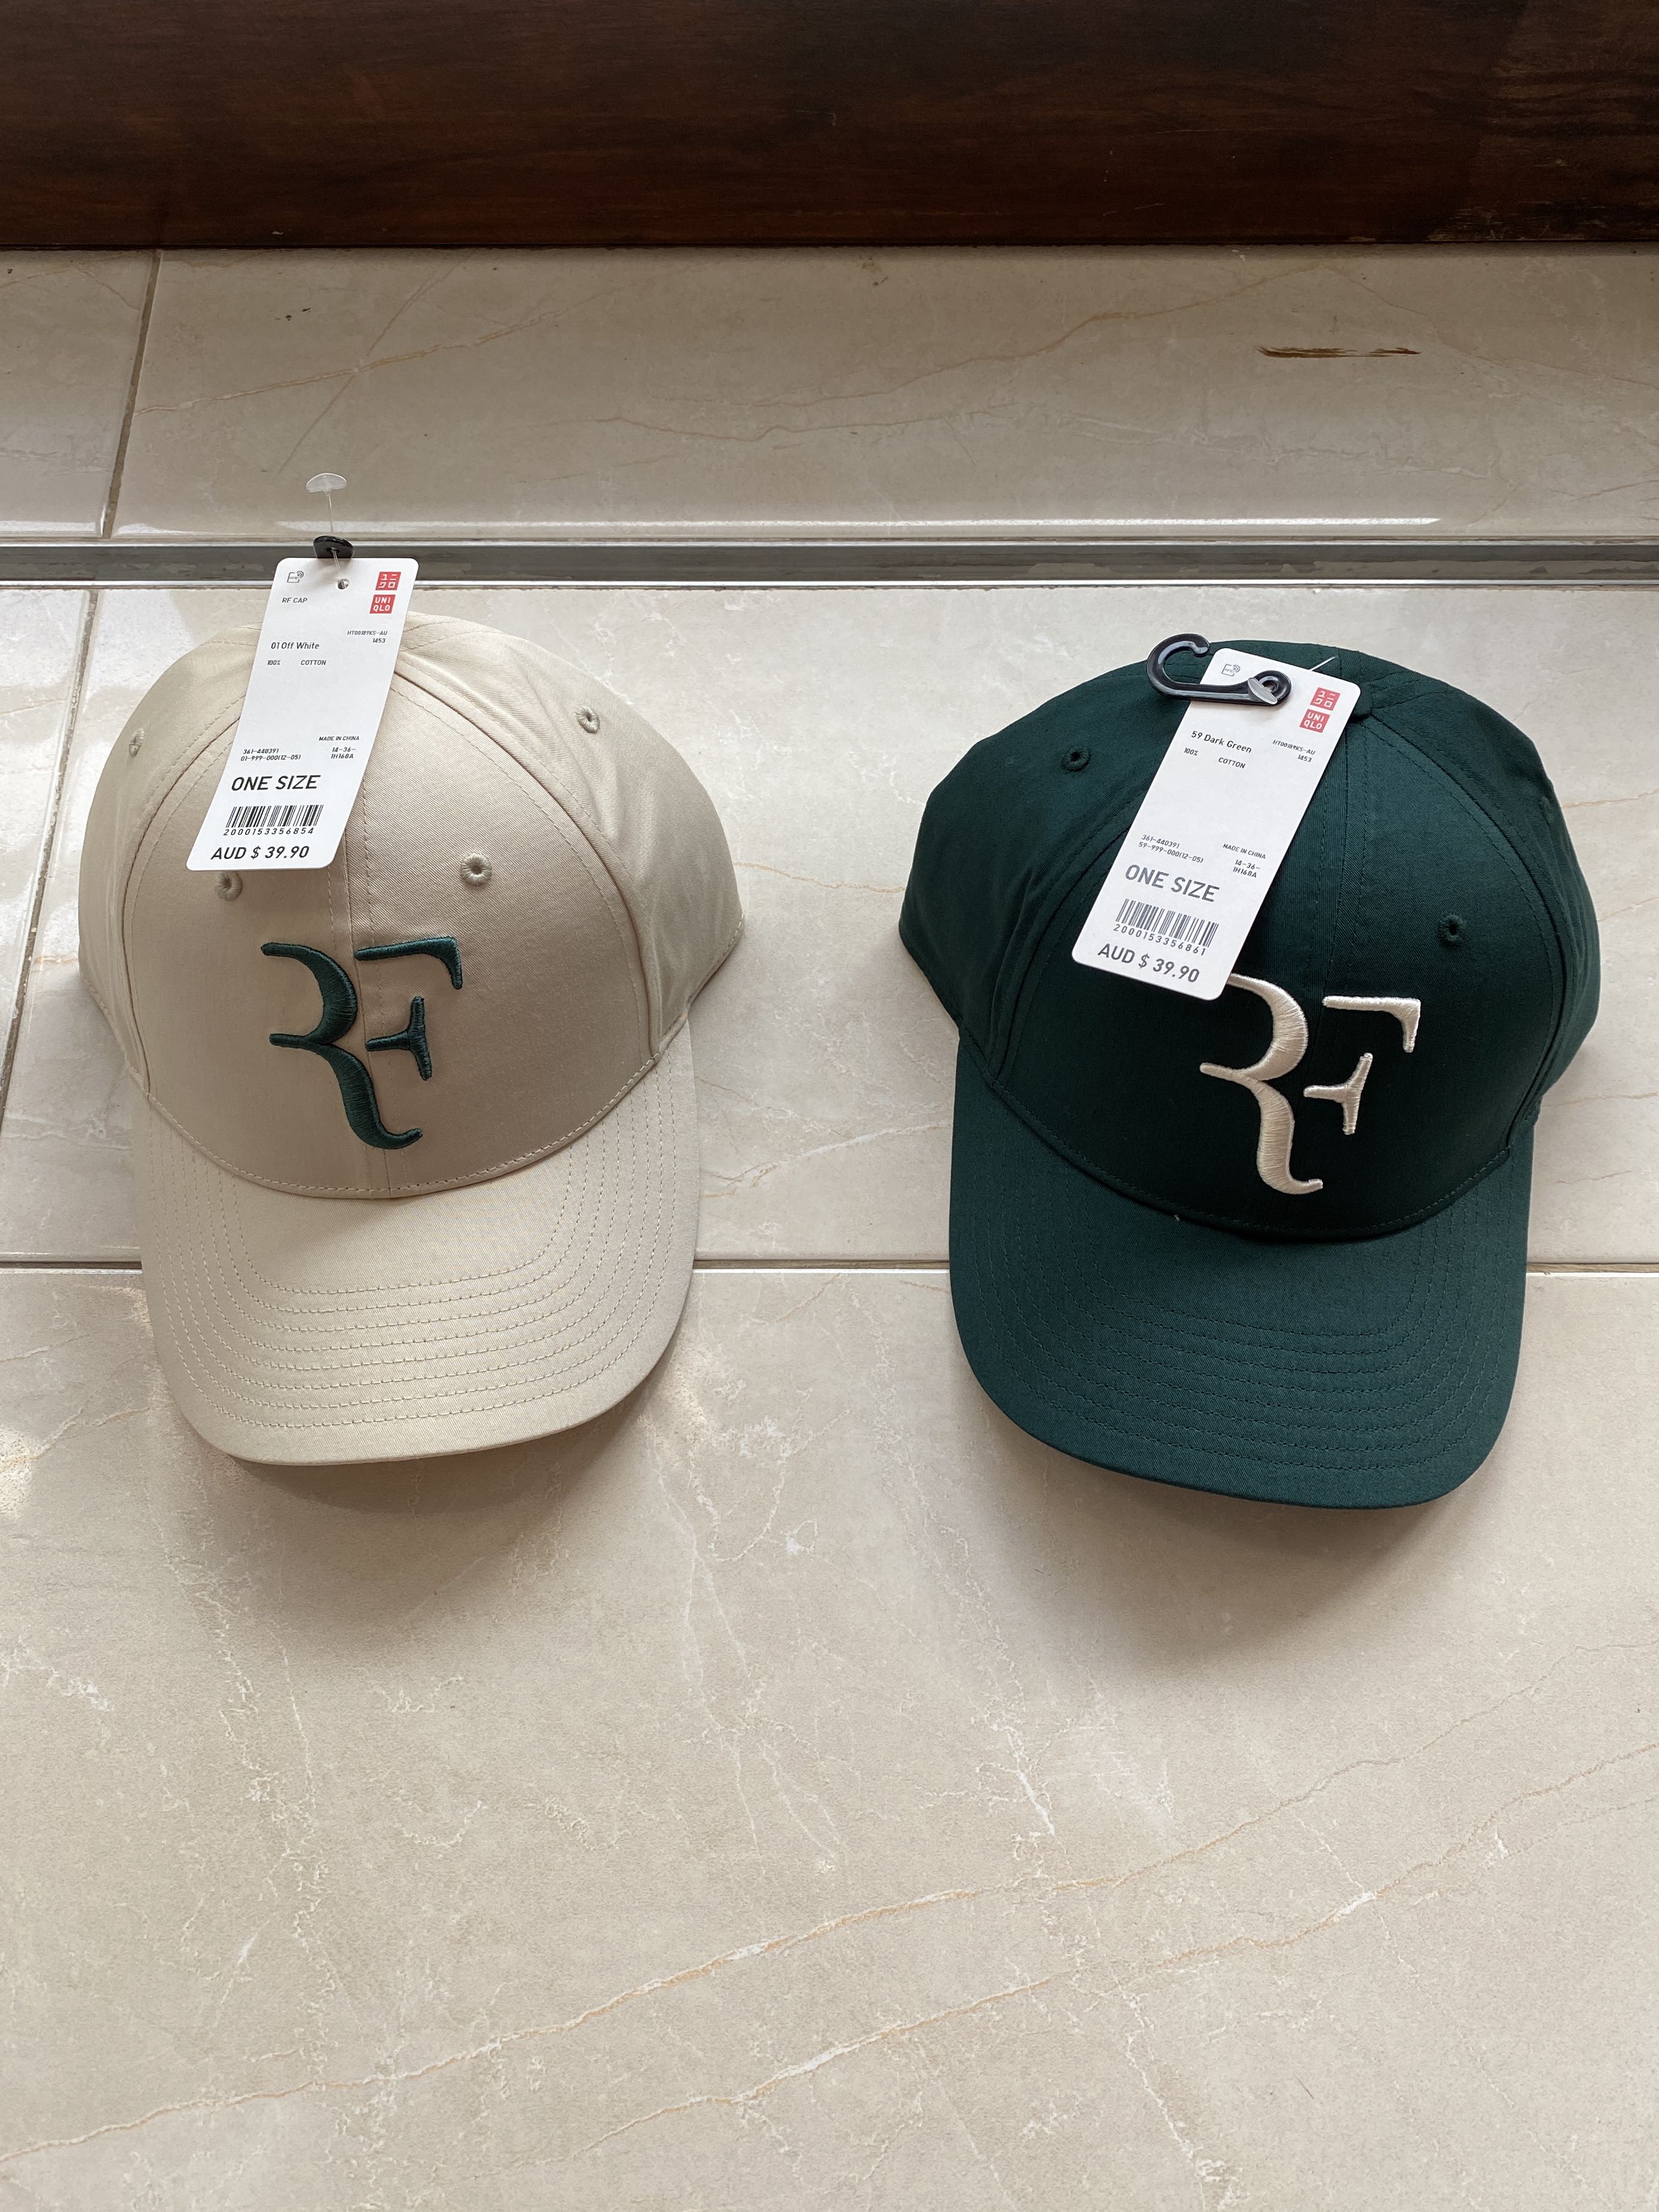 2020 Roger Federer RF UNIQLO Hat Cap Limited Ed Tennis Green Sold Out  IN  HAND  eBay